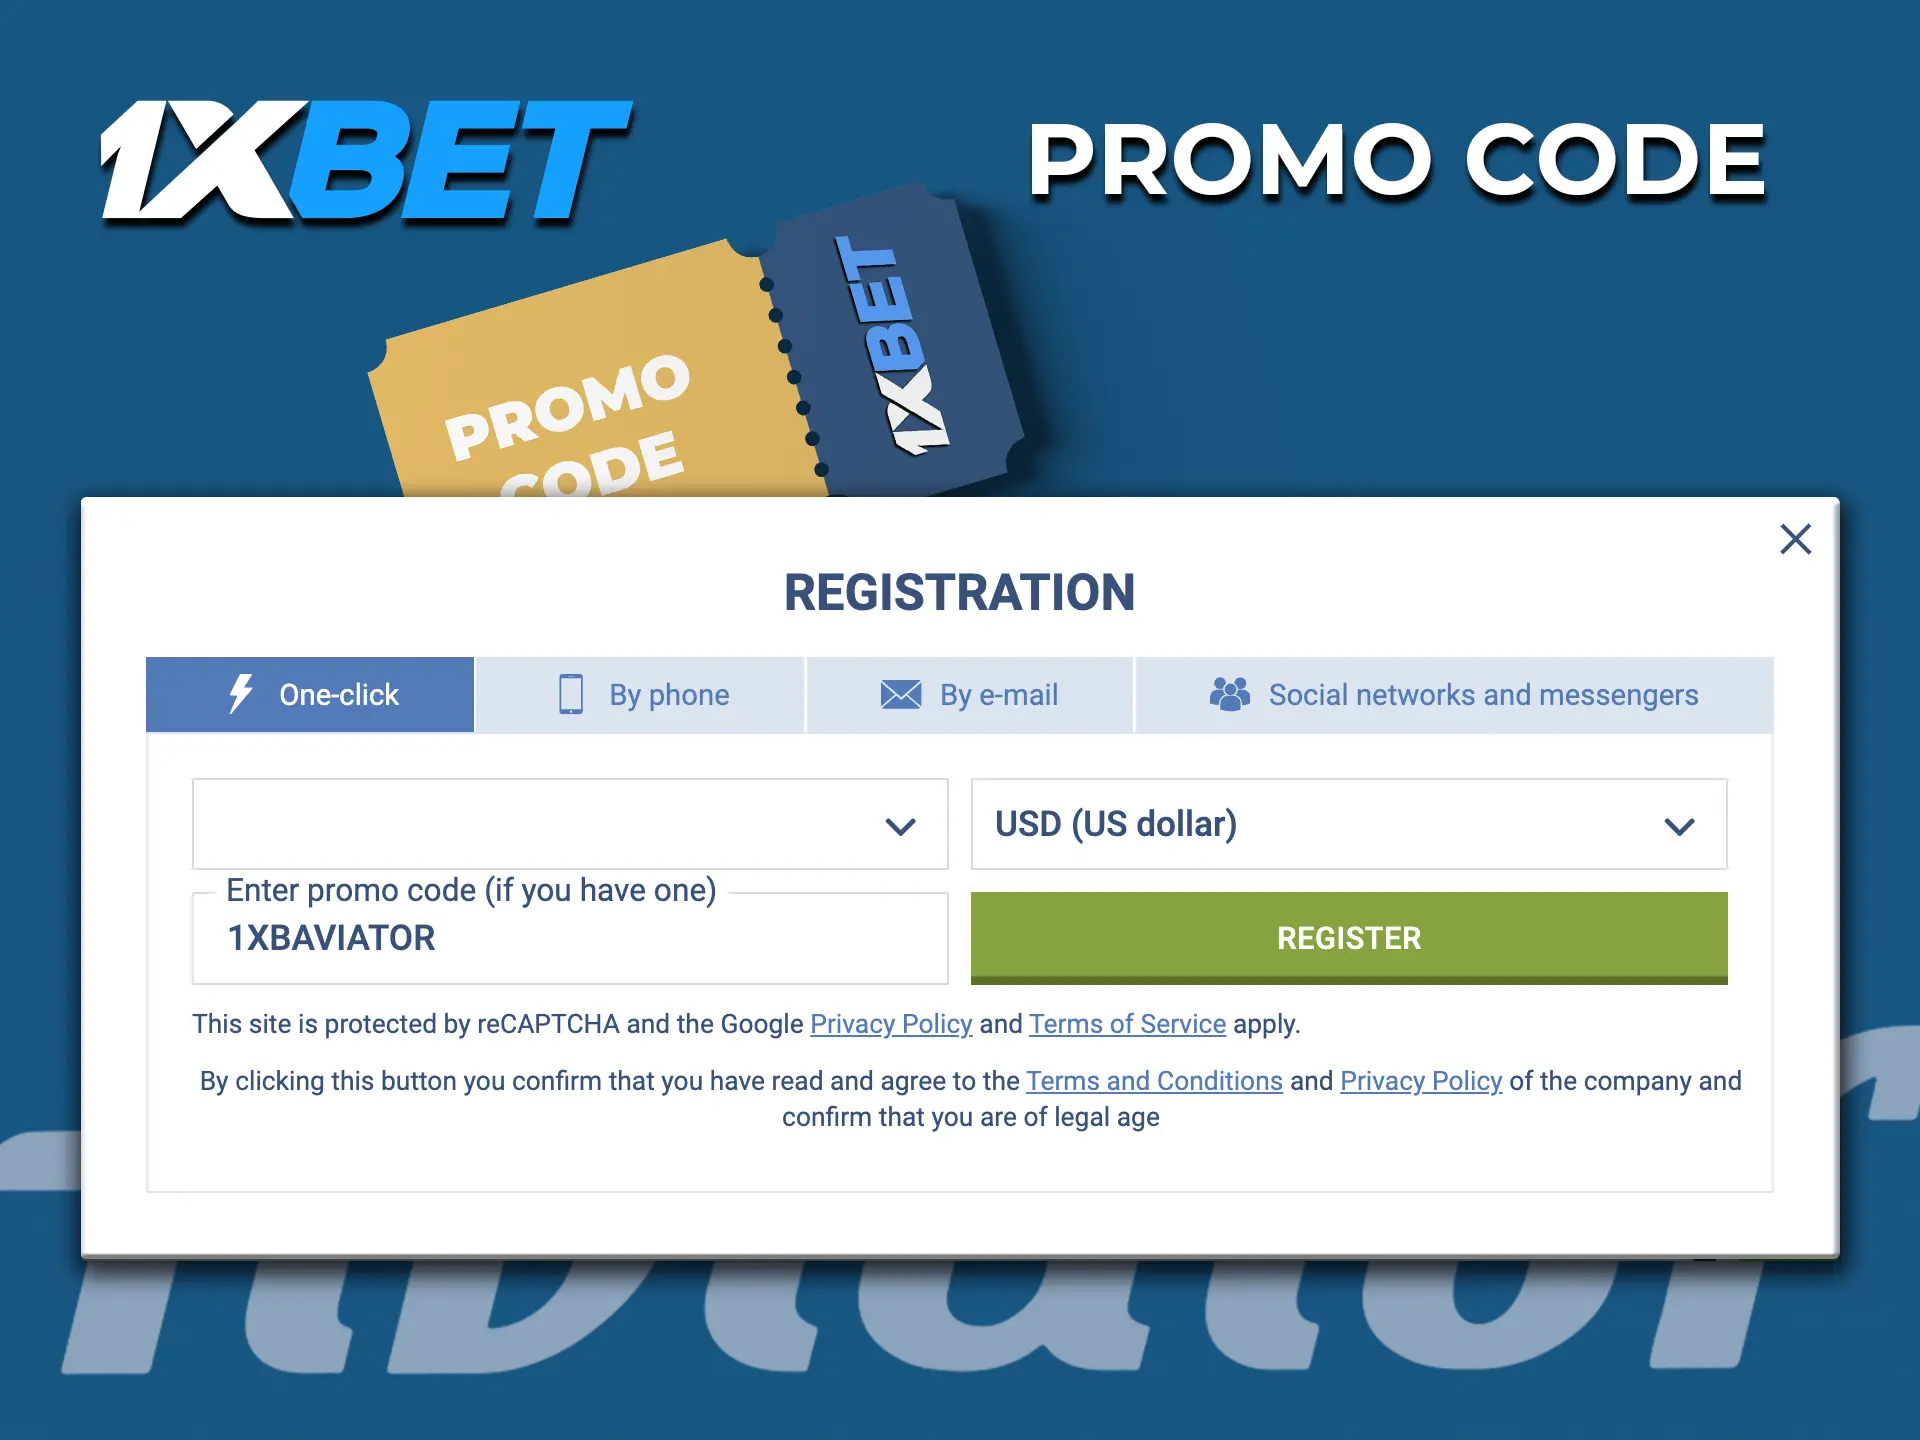 Use the promo code to increase your chances of winning big at Aviator from 1xbet.